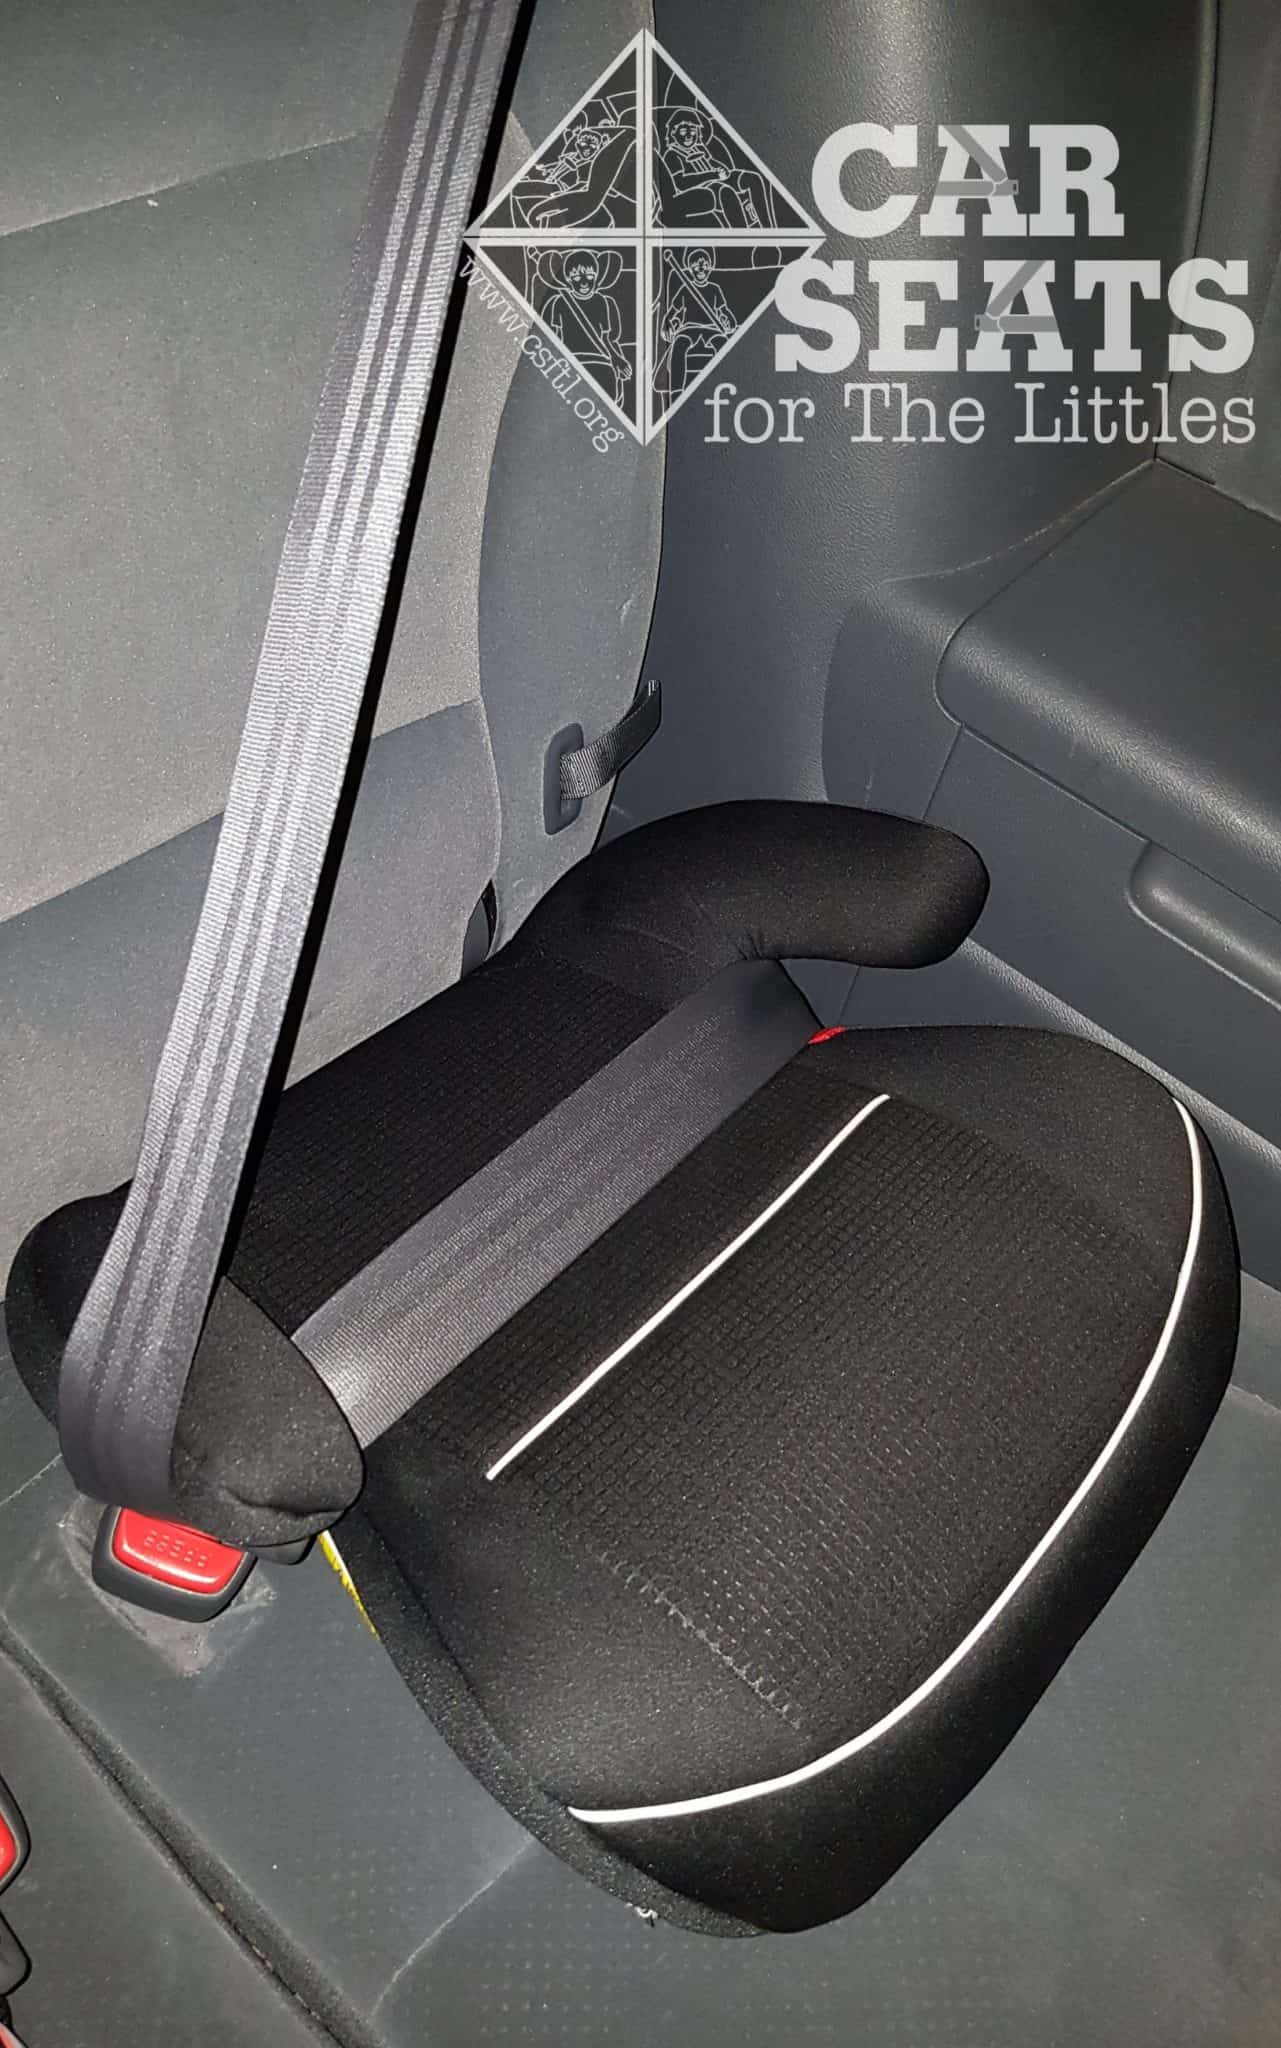 bily Backless Booster Seat Review - Canada only! - Car Seats For The